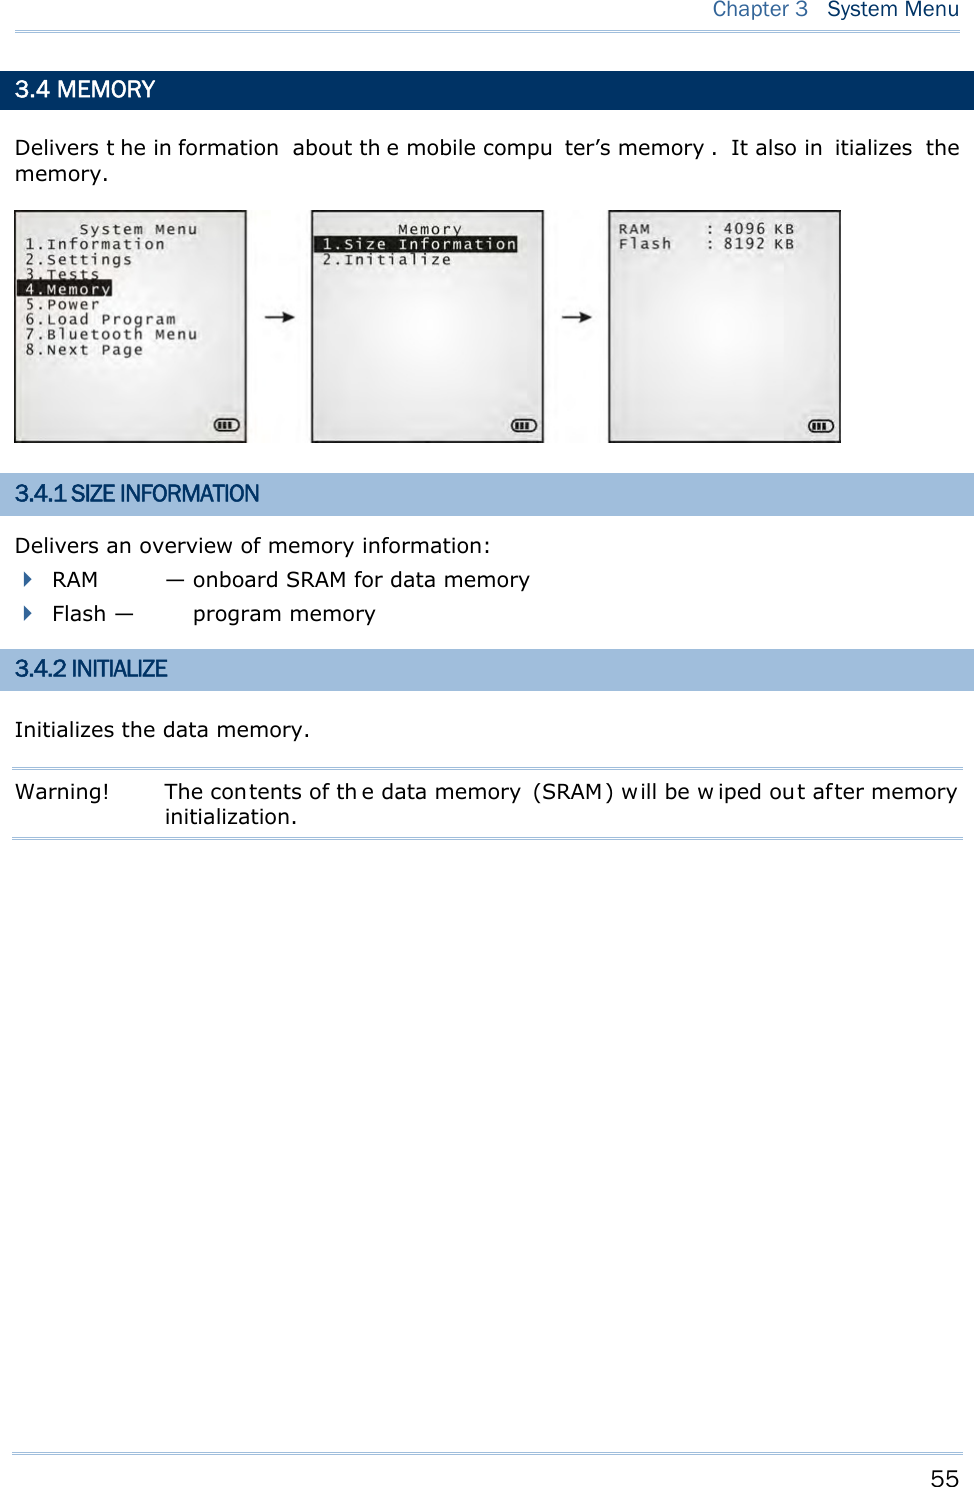     55   Chapter 3  System Menu  3.4 MEMORY Delivers t he in formation  about th e mobile compu ter’s memory .  It also in itializes  the memory.  3.4.1 SIZE INFORMATION Delivers an overview of memory information:  RAM  — onboard SRAM for data memory  Flash —  program memory 3.4.2 INITIALIZE Initializes the data memory. Warning!  The contents of th e data memory  (SRAM) will be w iped out after memory initialization.        